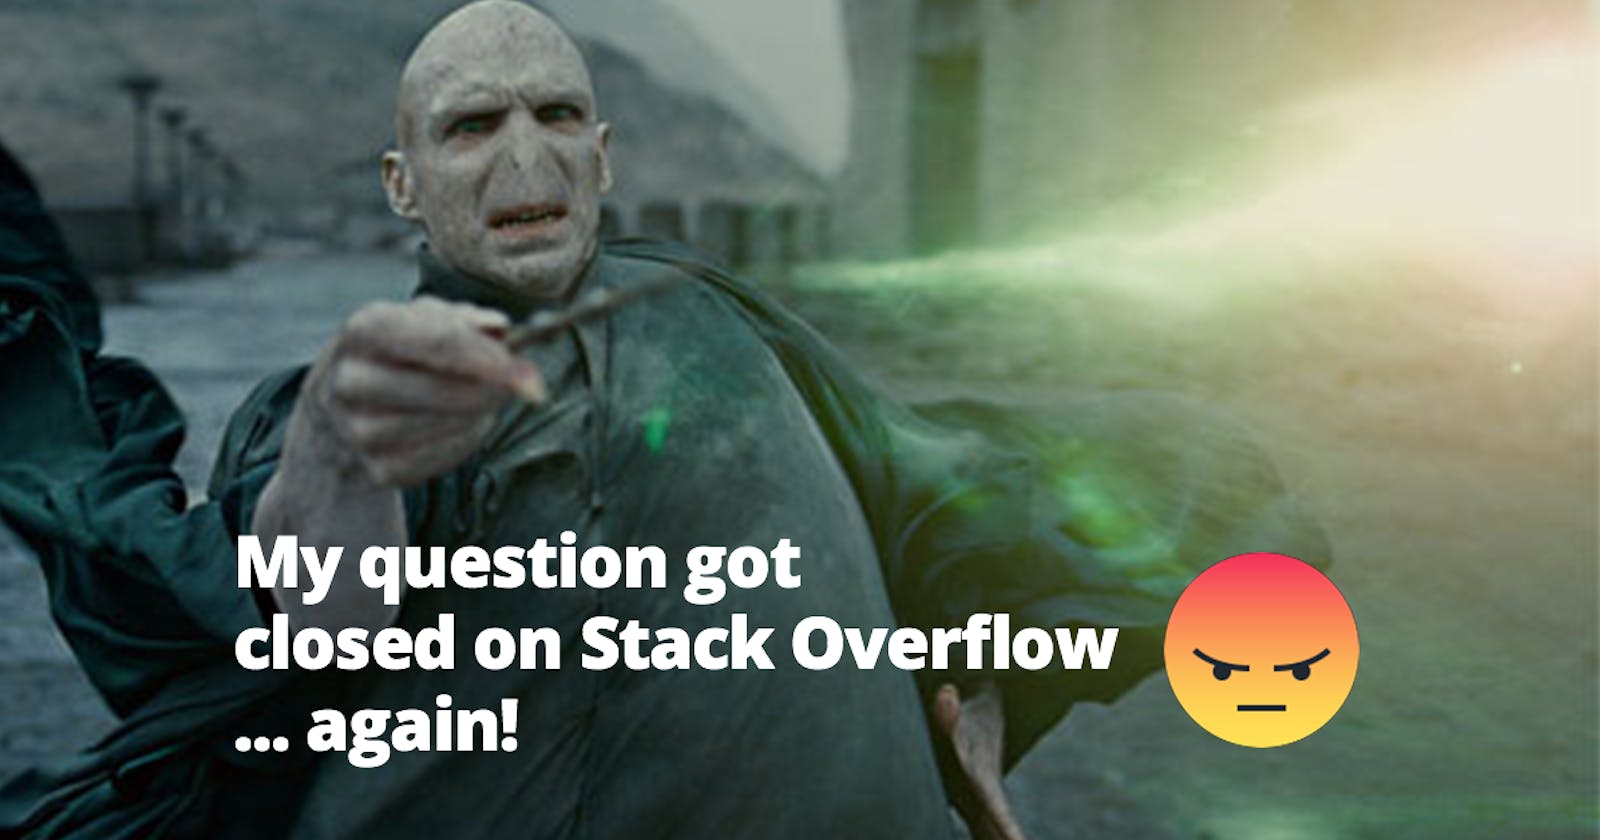 Where do you ask your programming questions that aren’t allowed on Stack Overflow?